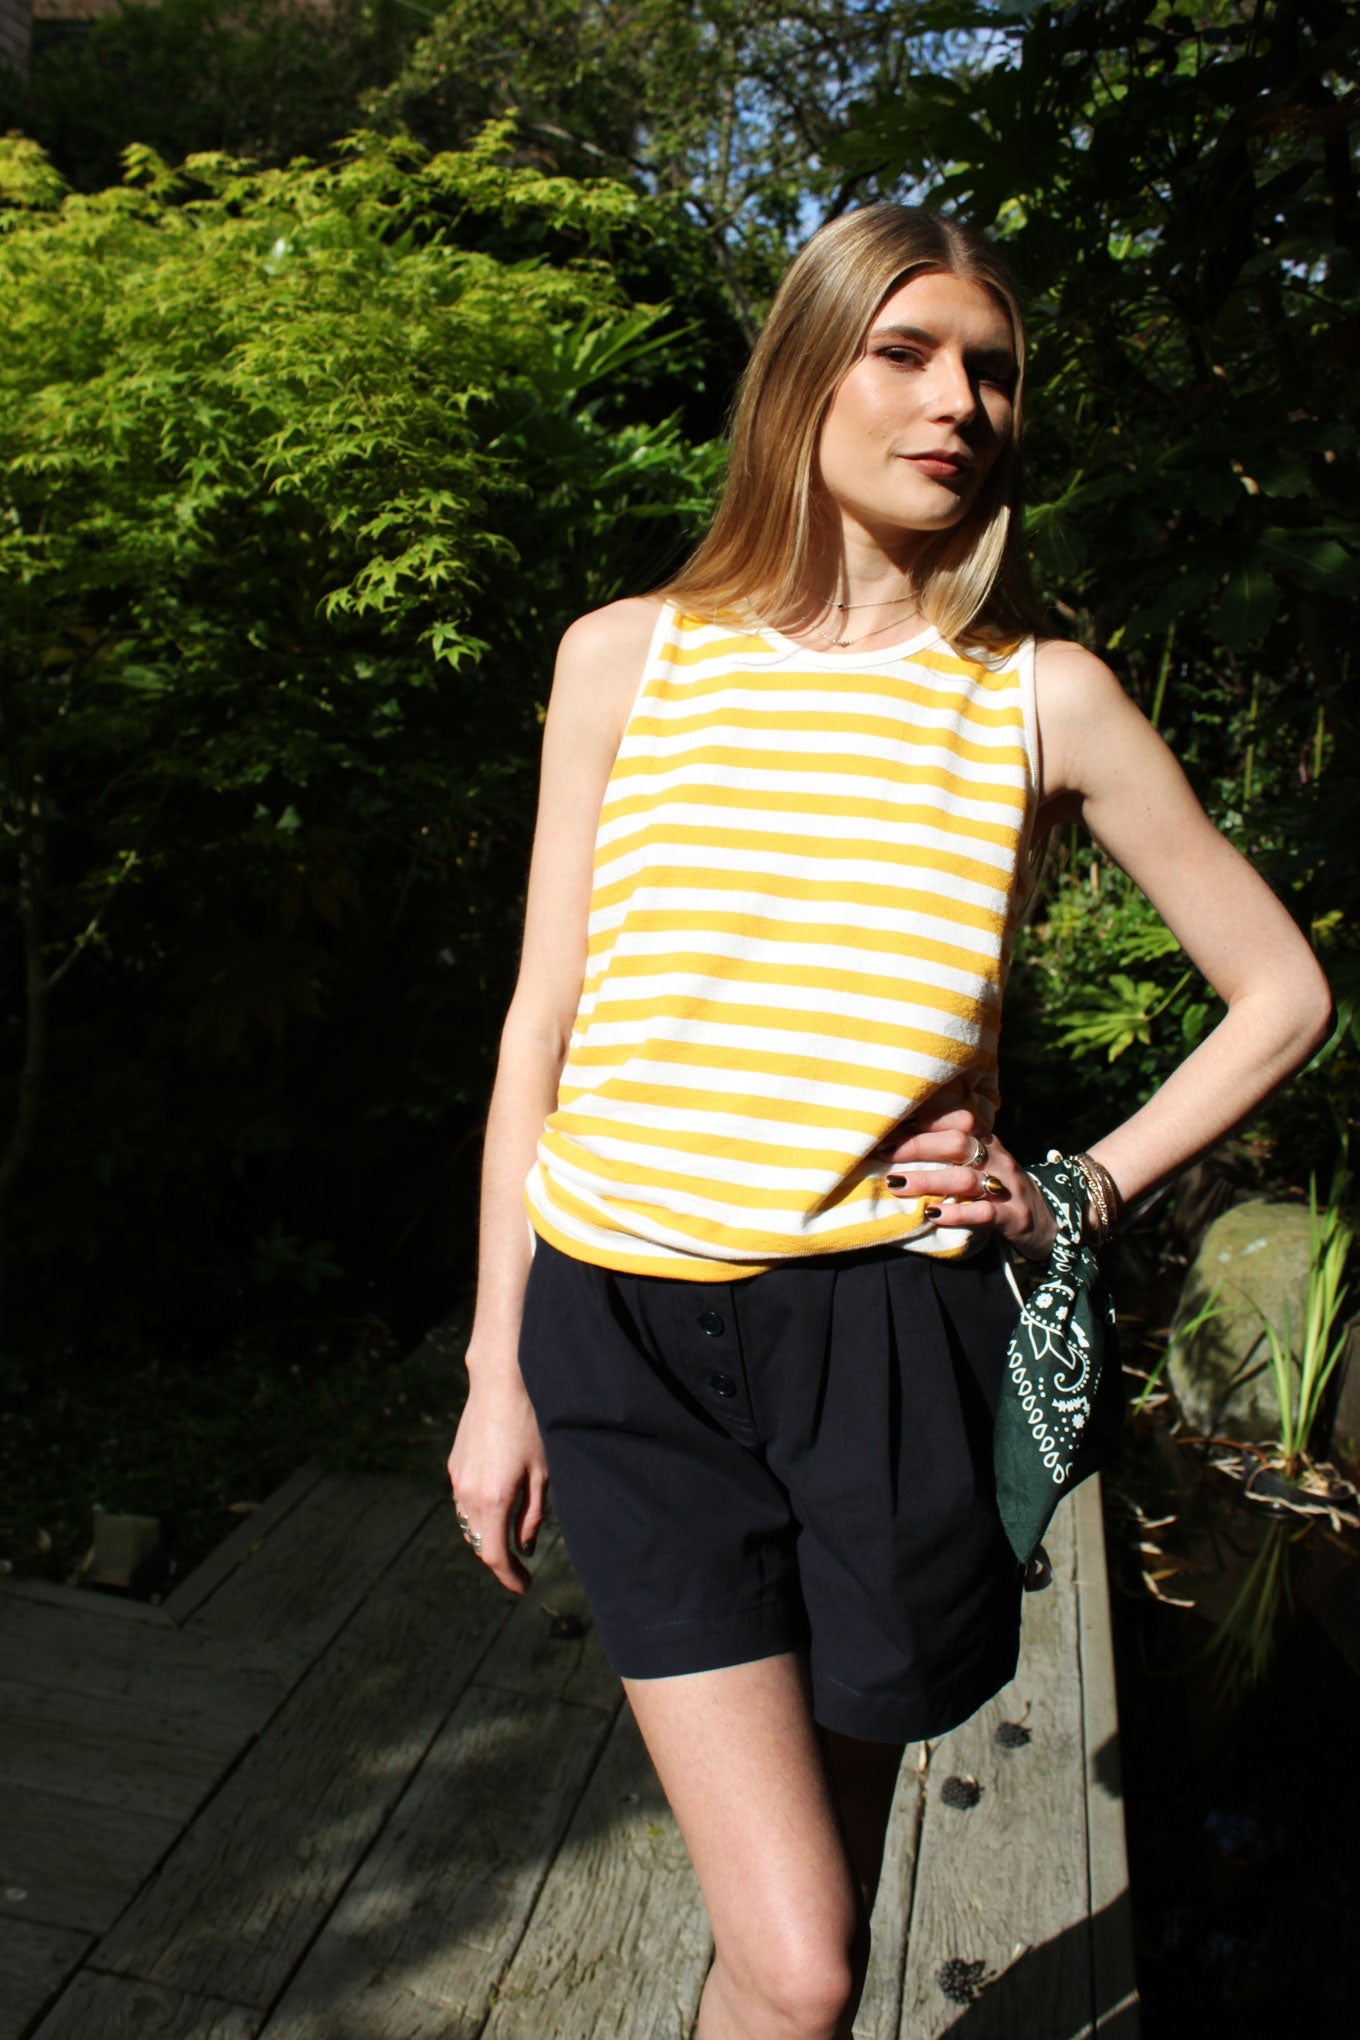 Yellow, white, striped short-sleeved top ROSALIE made of organic cotton by Komodo